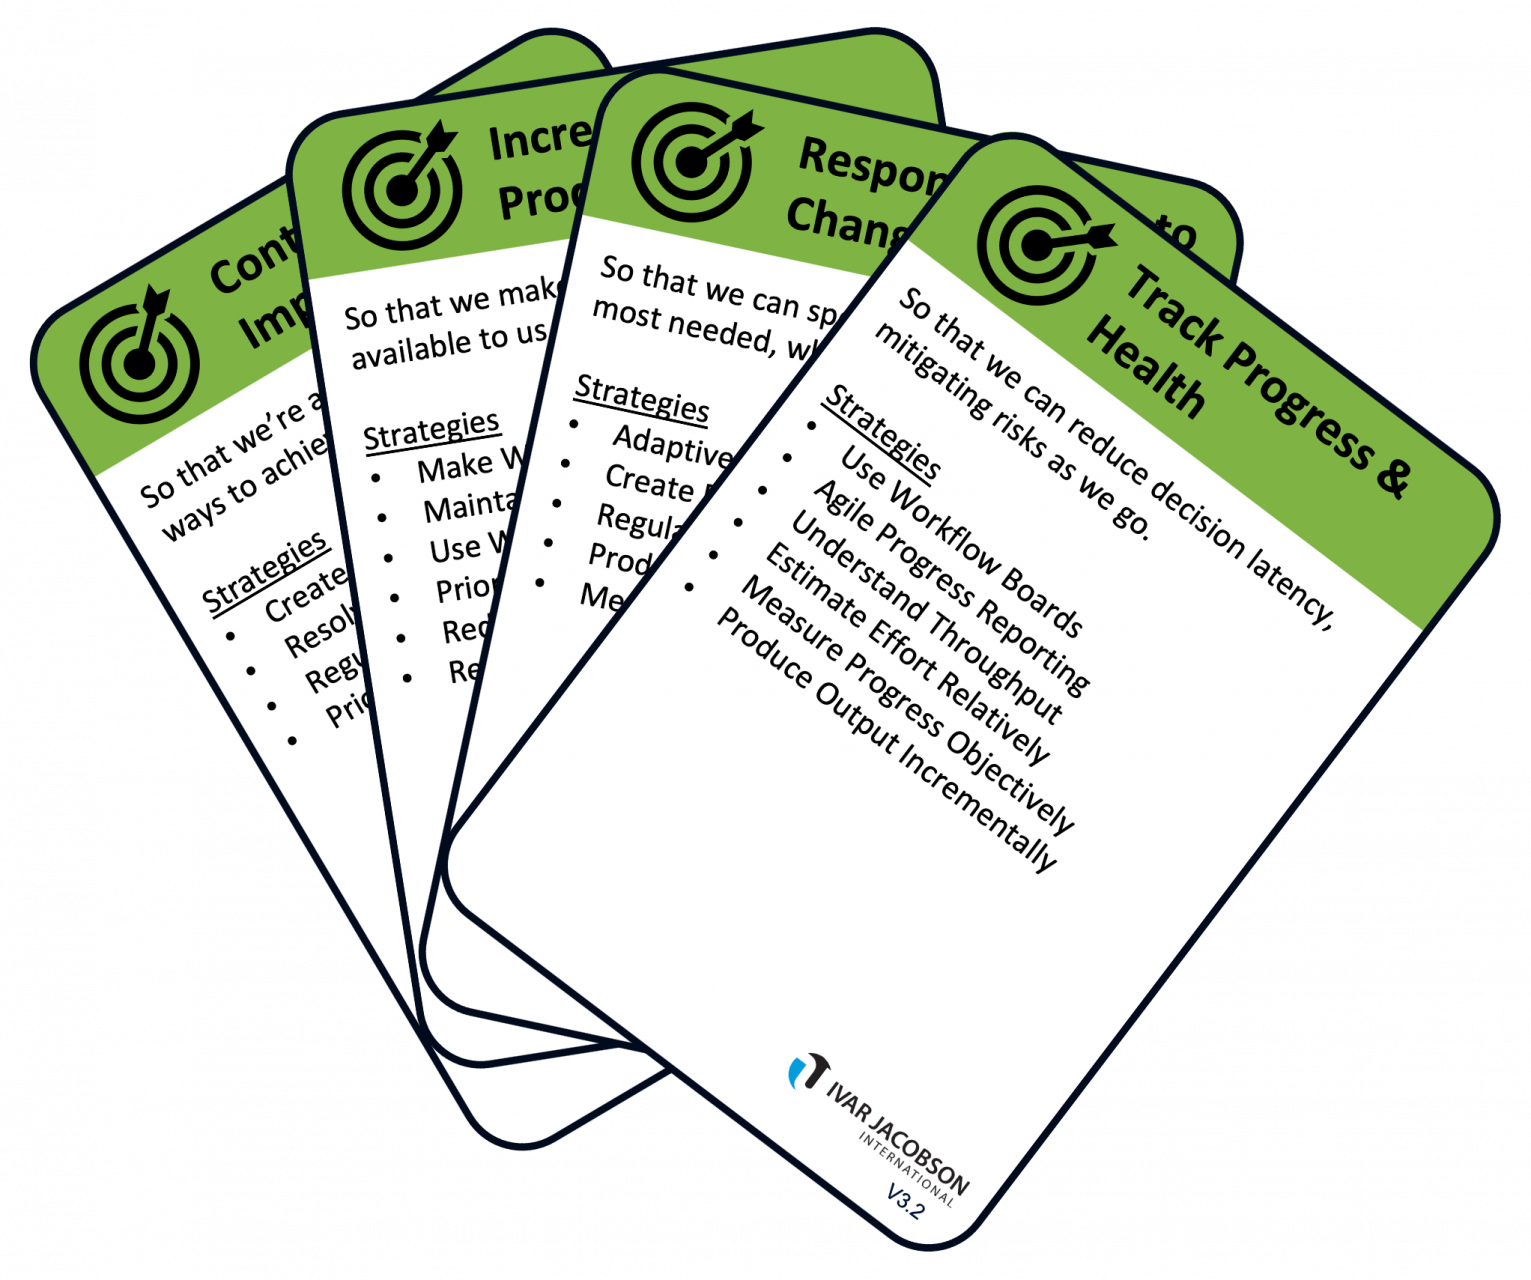 Image of some of the cards from the Essence based Method Agnostic Agility Cards used to help people learn about some key agile principles.